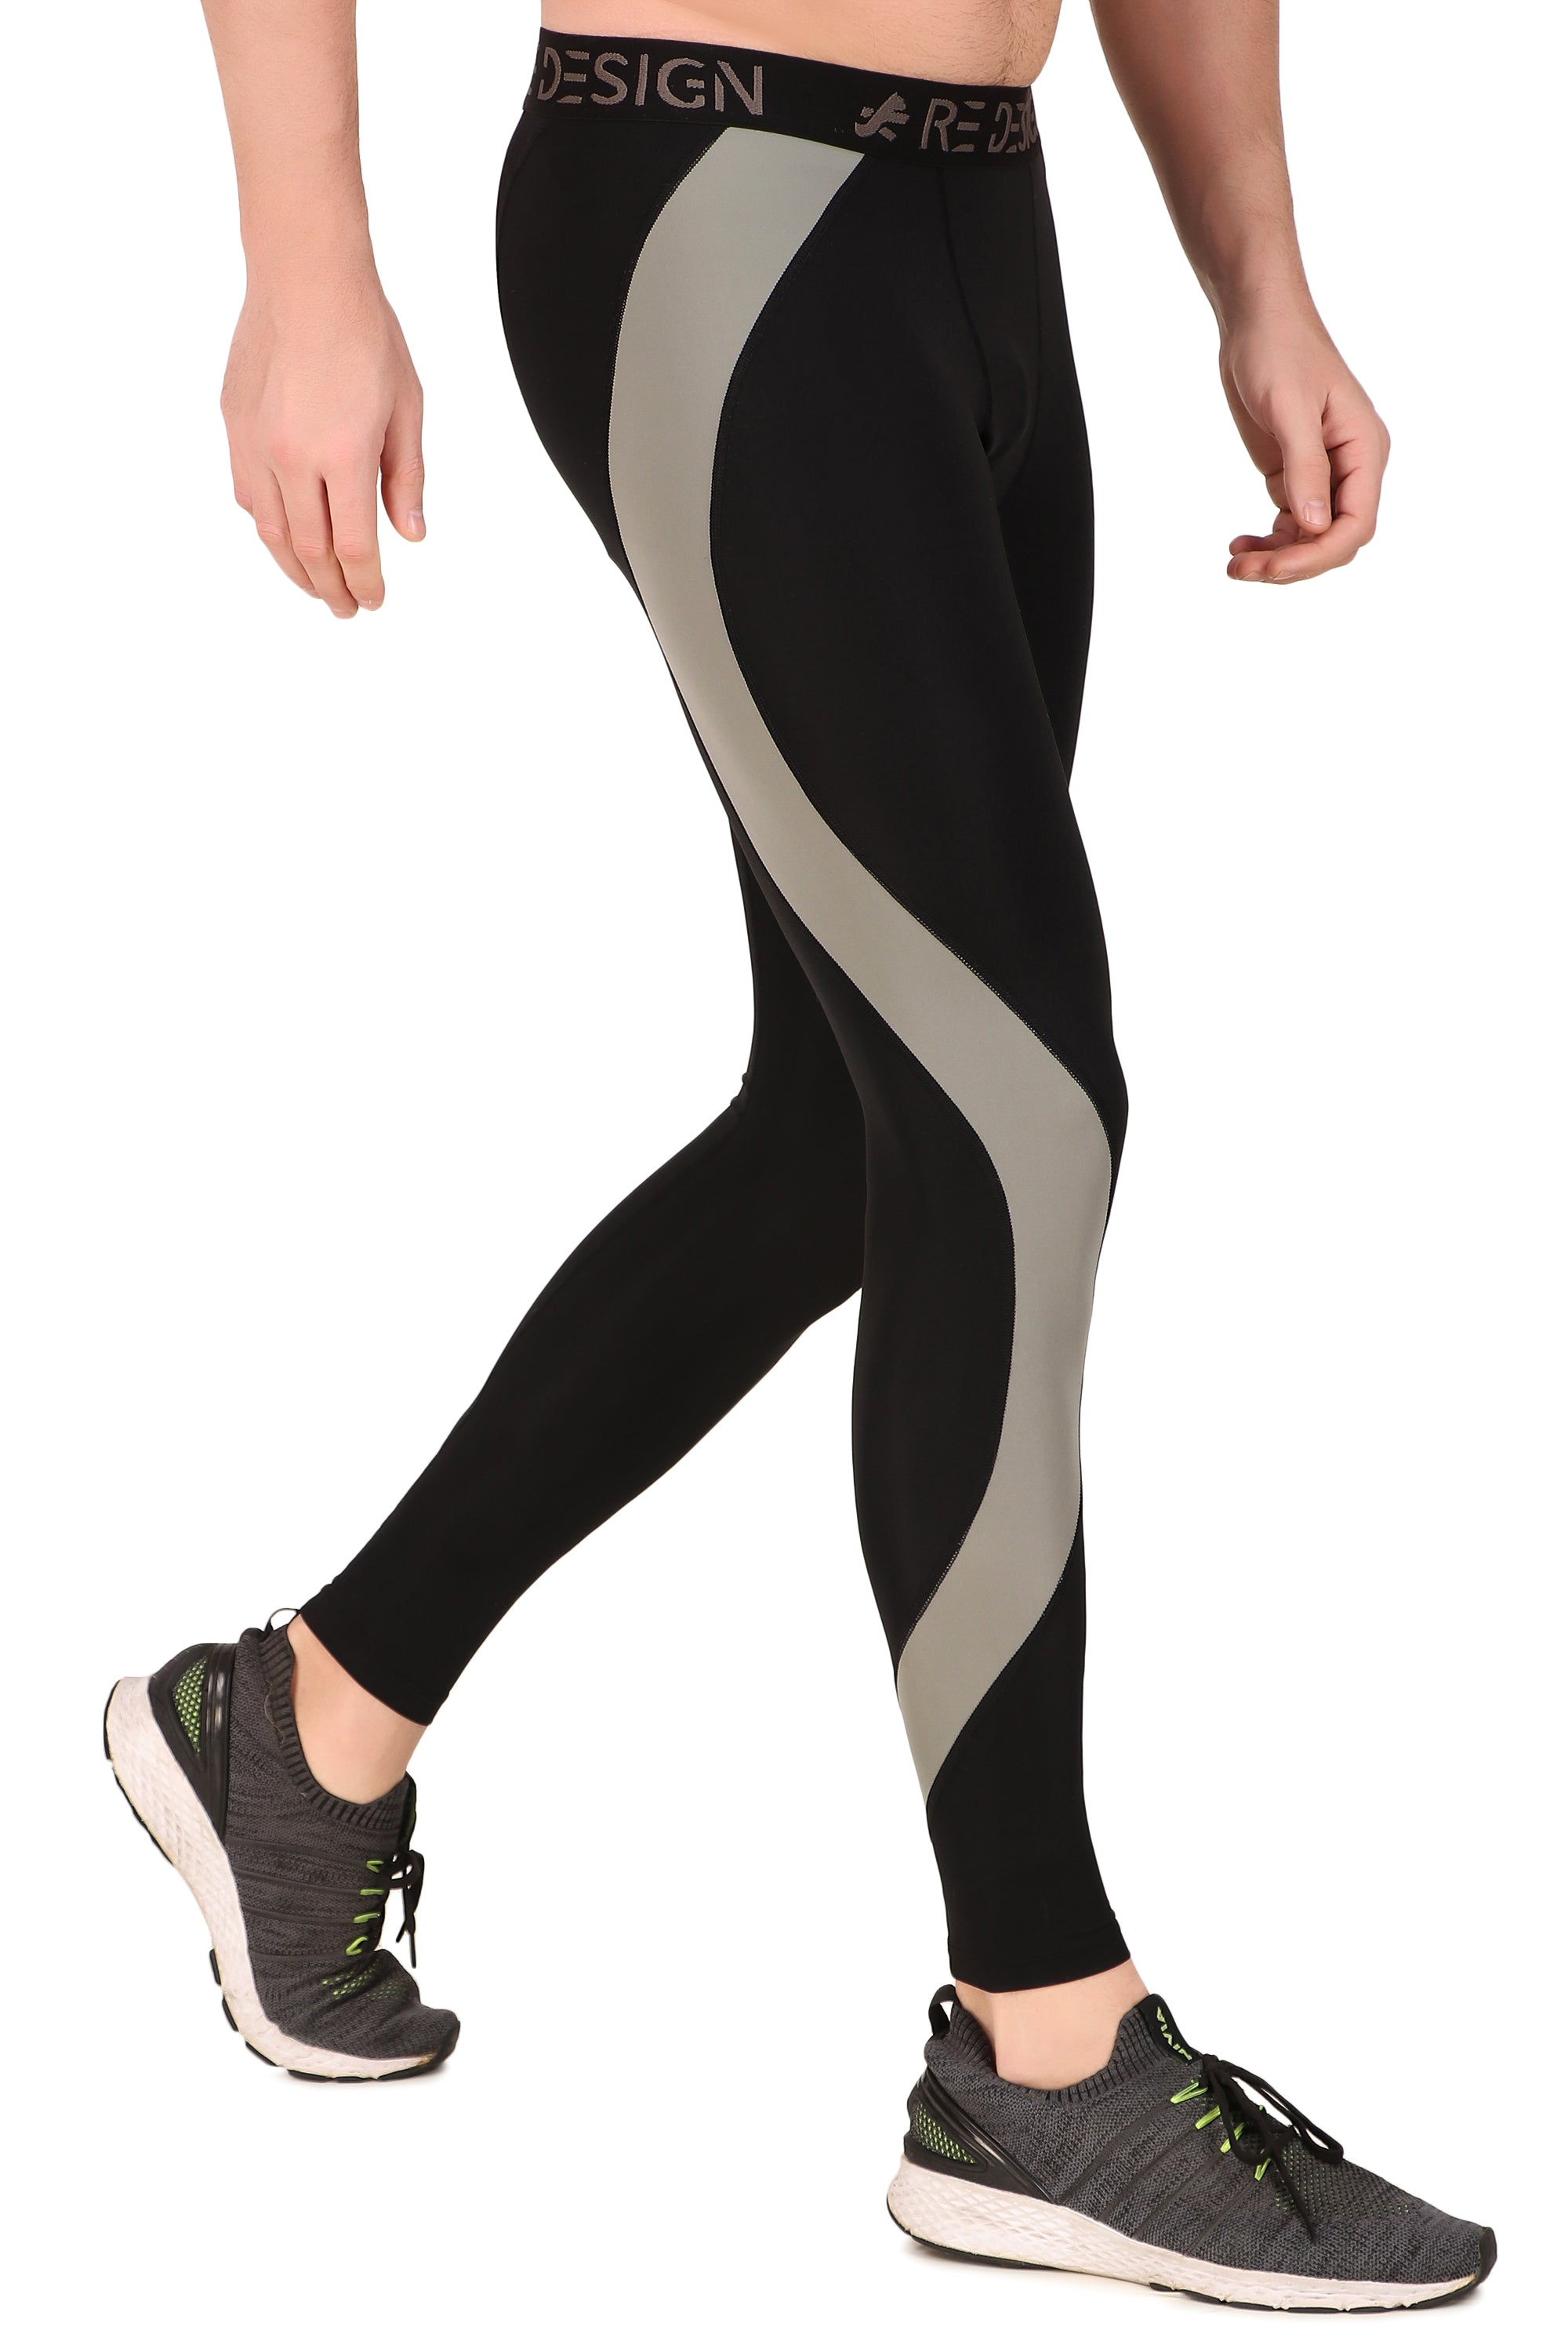 Nylon Compression Pant and Full Tights For Men (BLACK/LIGHT GREY)